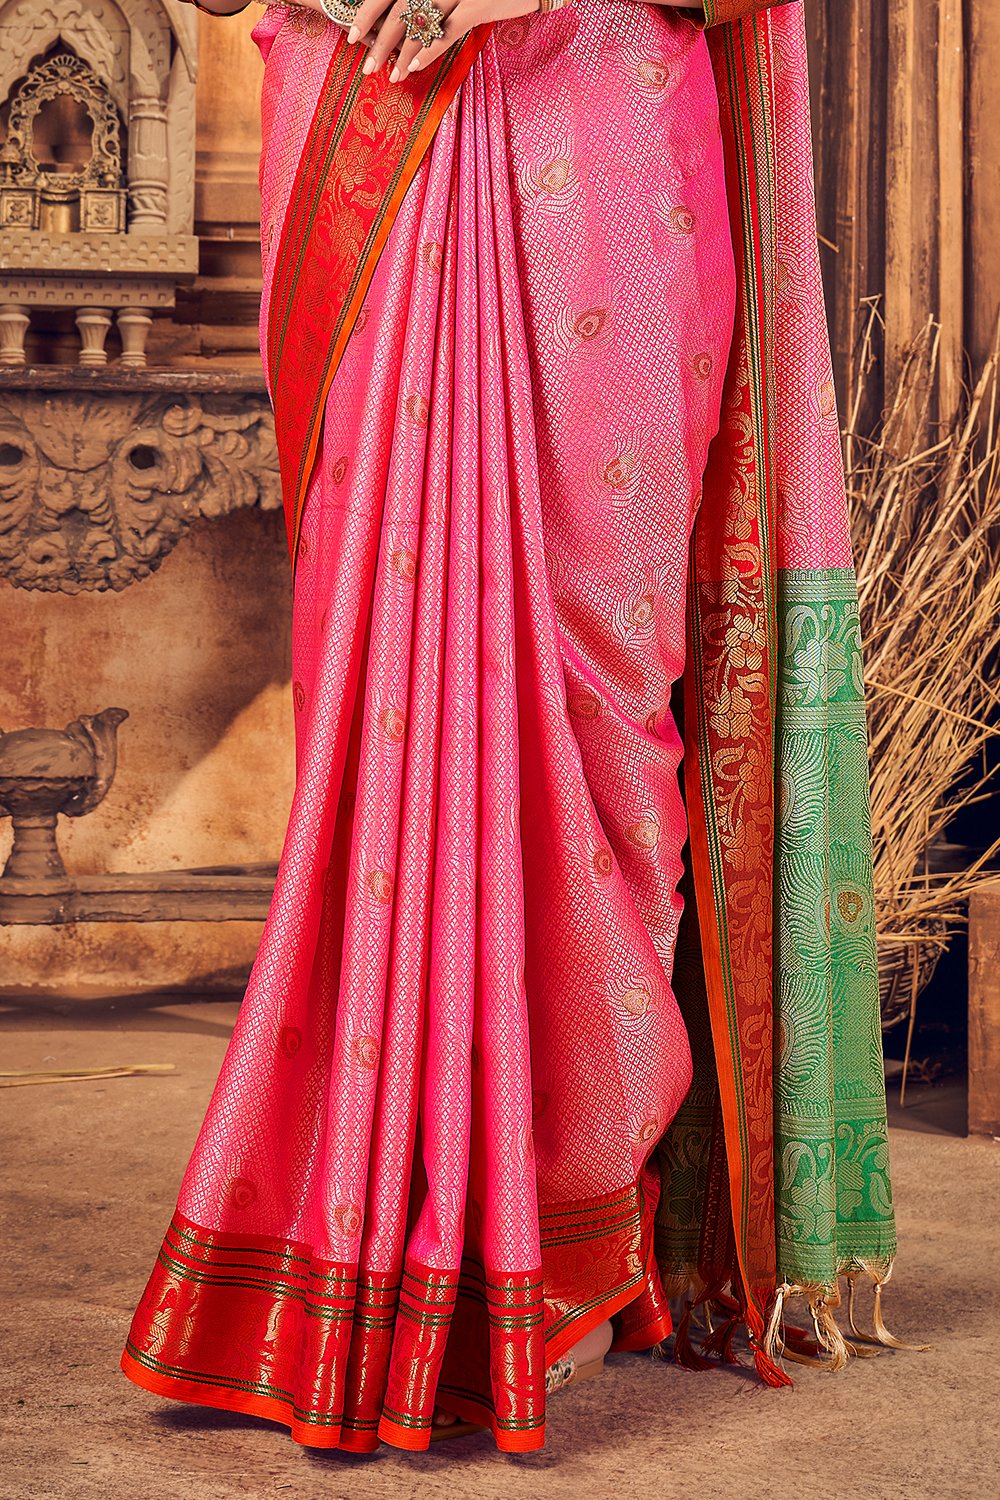 Womens Cotton Pink Saree With Blouse Piece